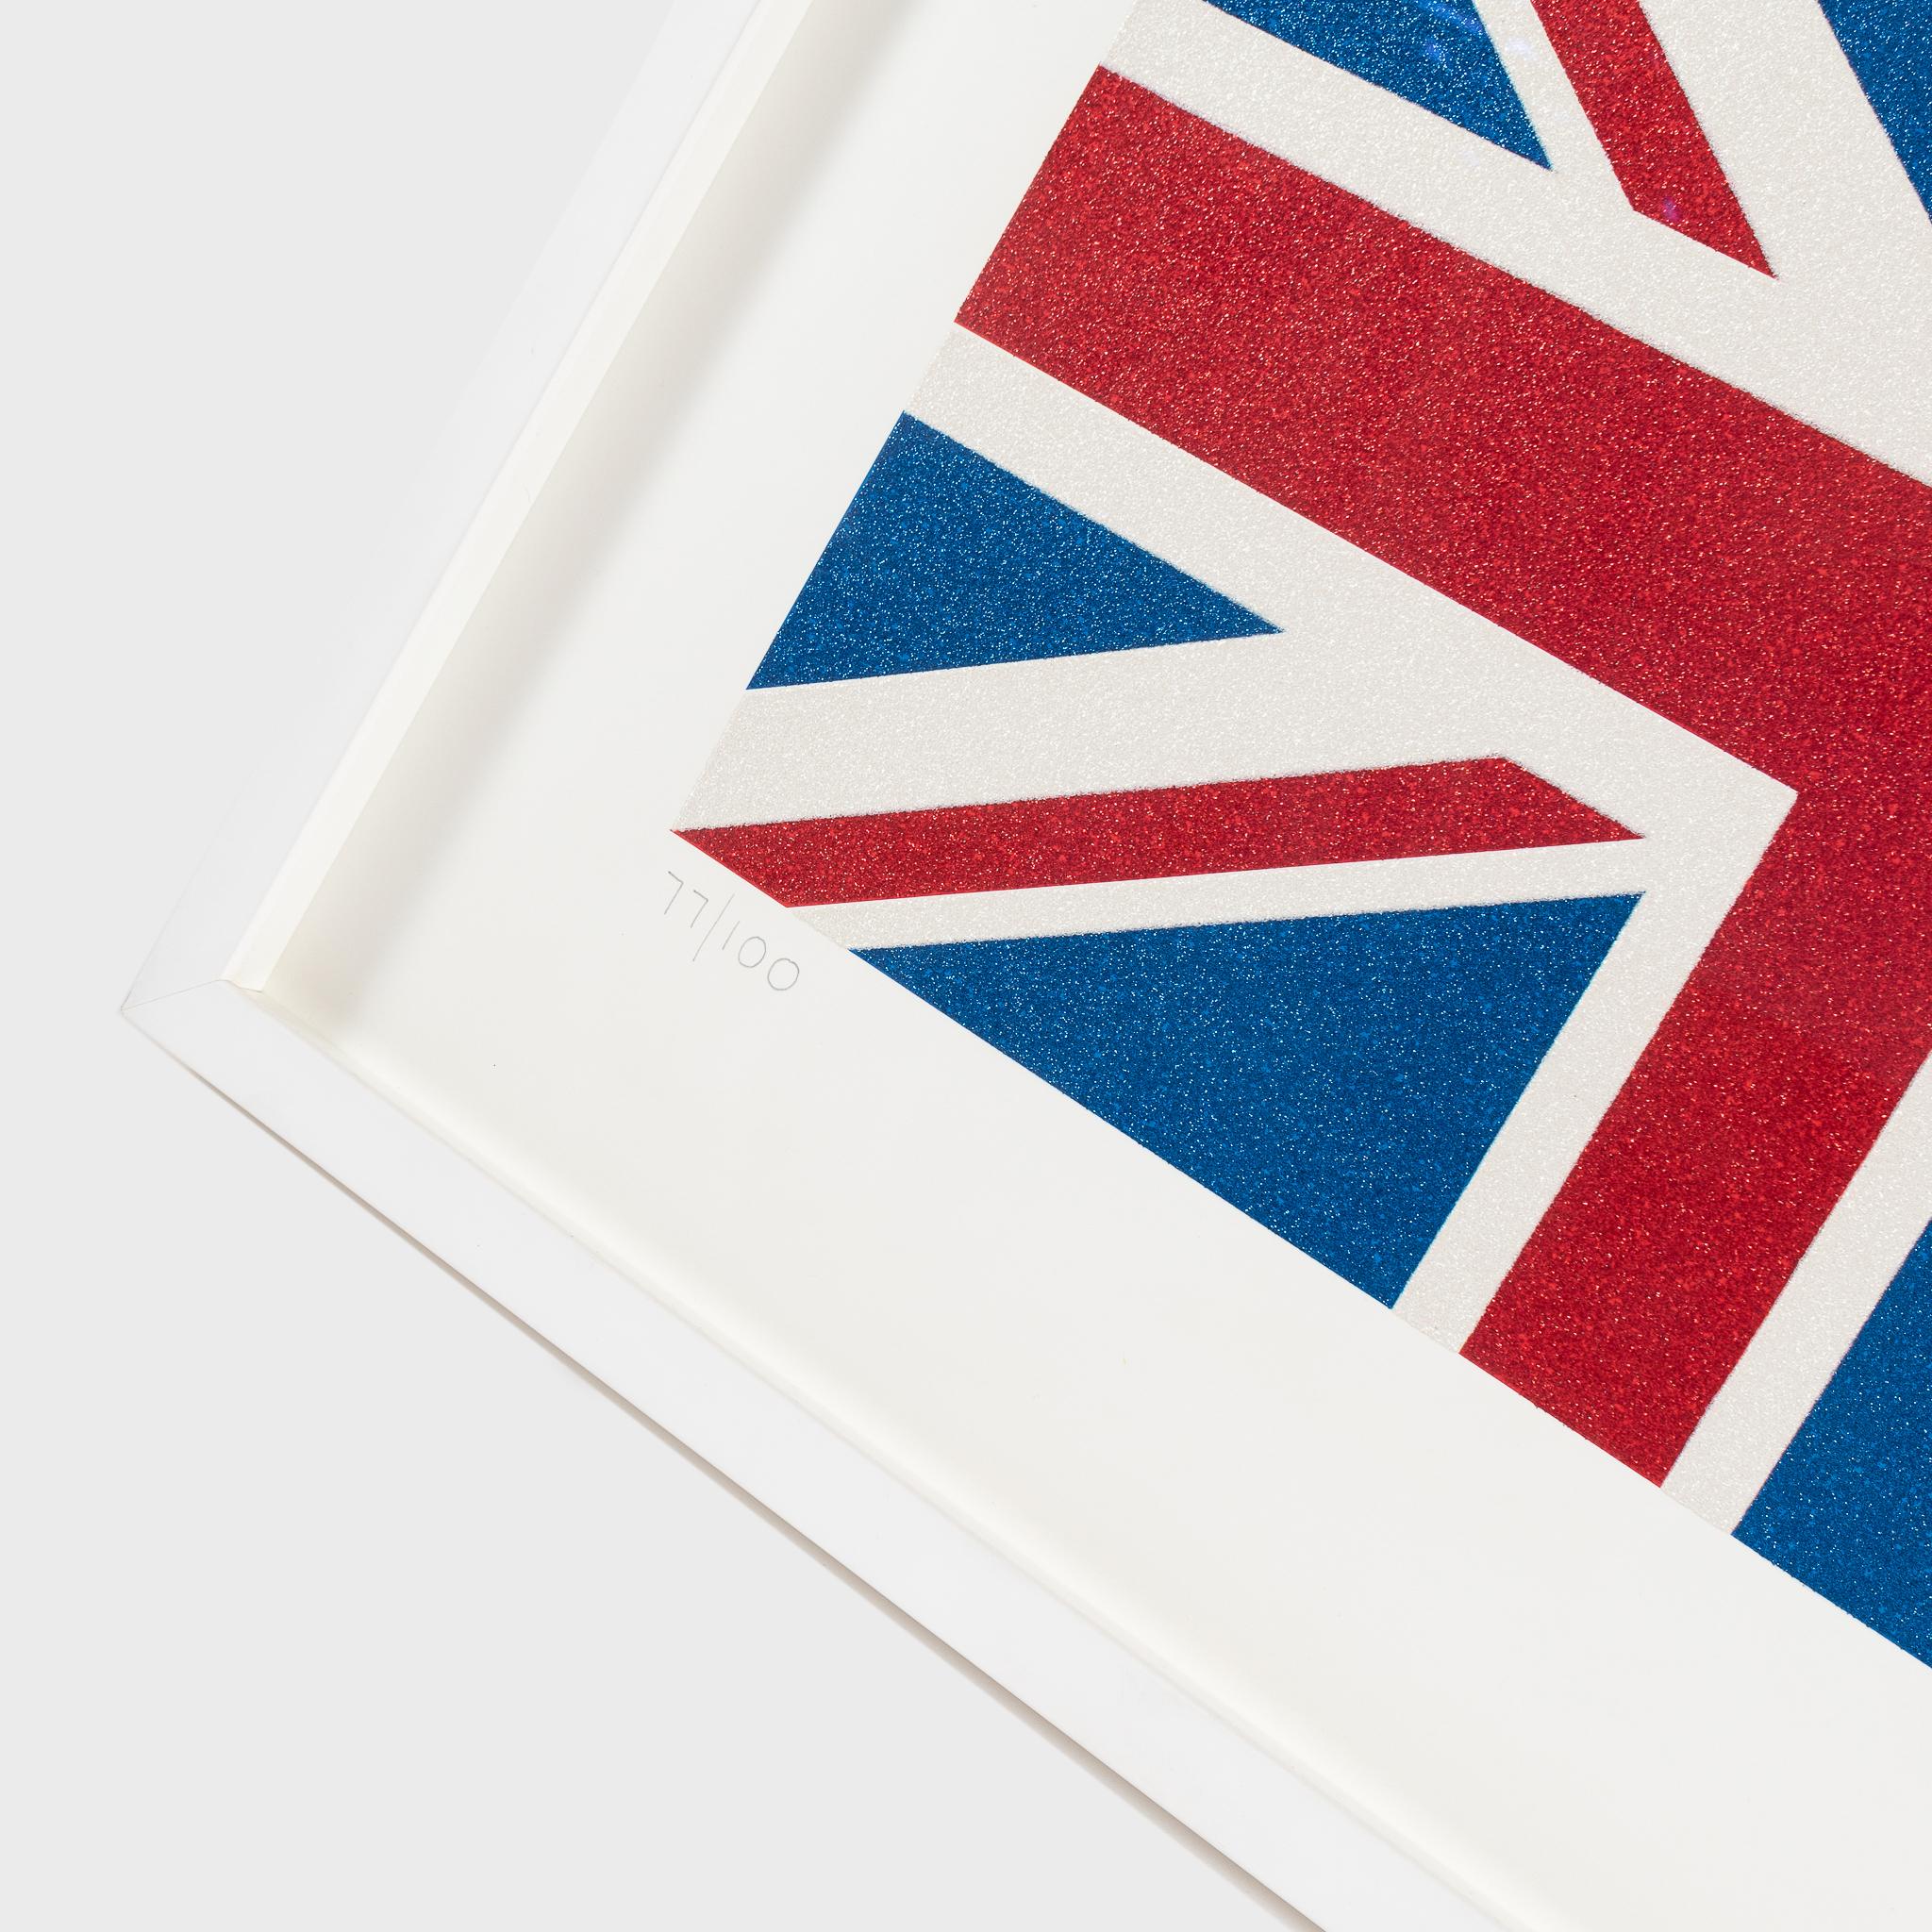 Small Union Flag - Gray Figurative Print by Peter Blake